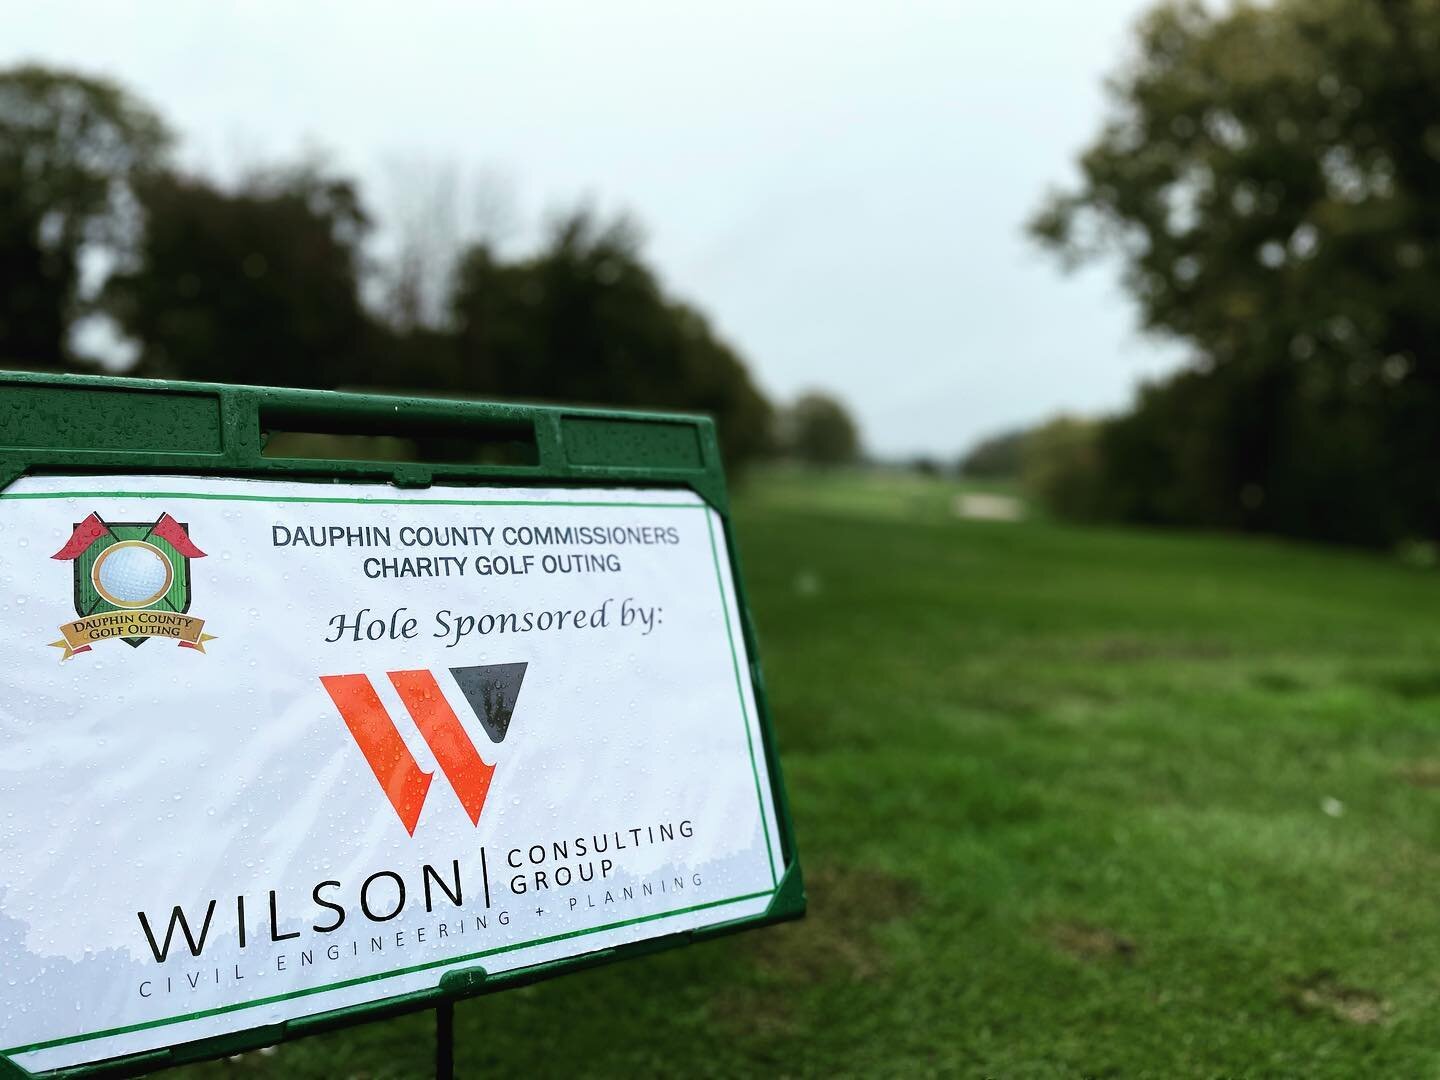 Splish splash. We were pleased to sponsor @dauphincounty_parksrec in the Counties pursuit of a thriving and healthy community. #wcgengineered #gripandrip #communityfirst